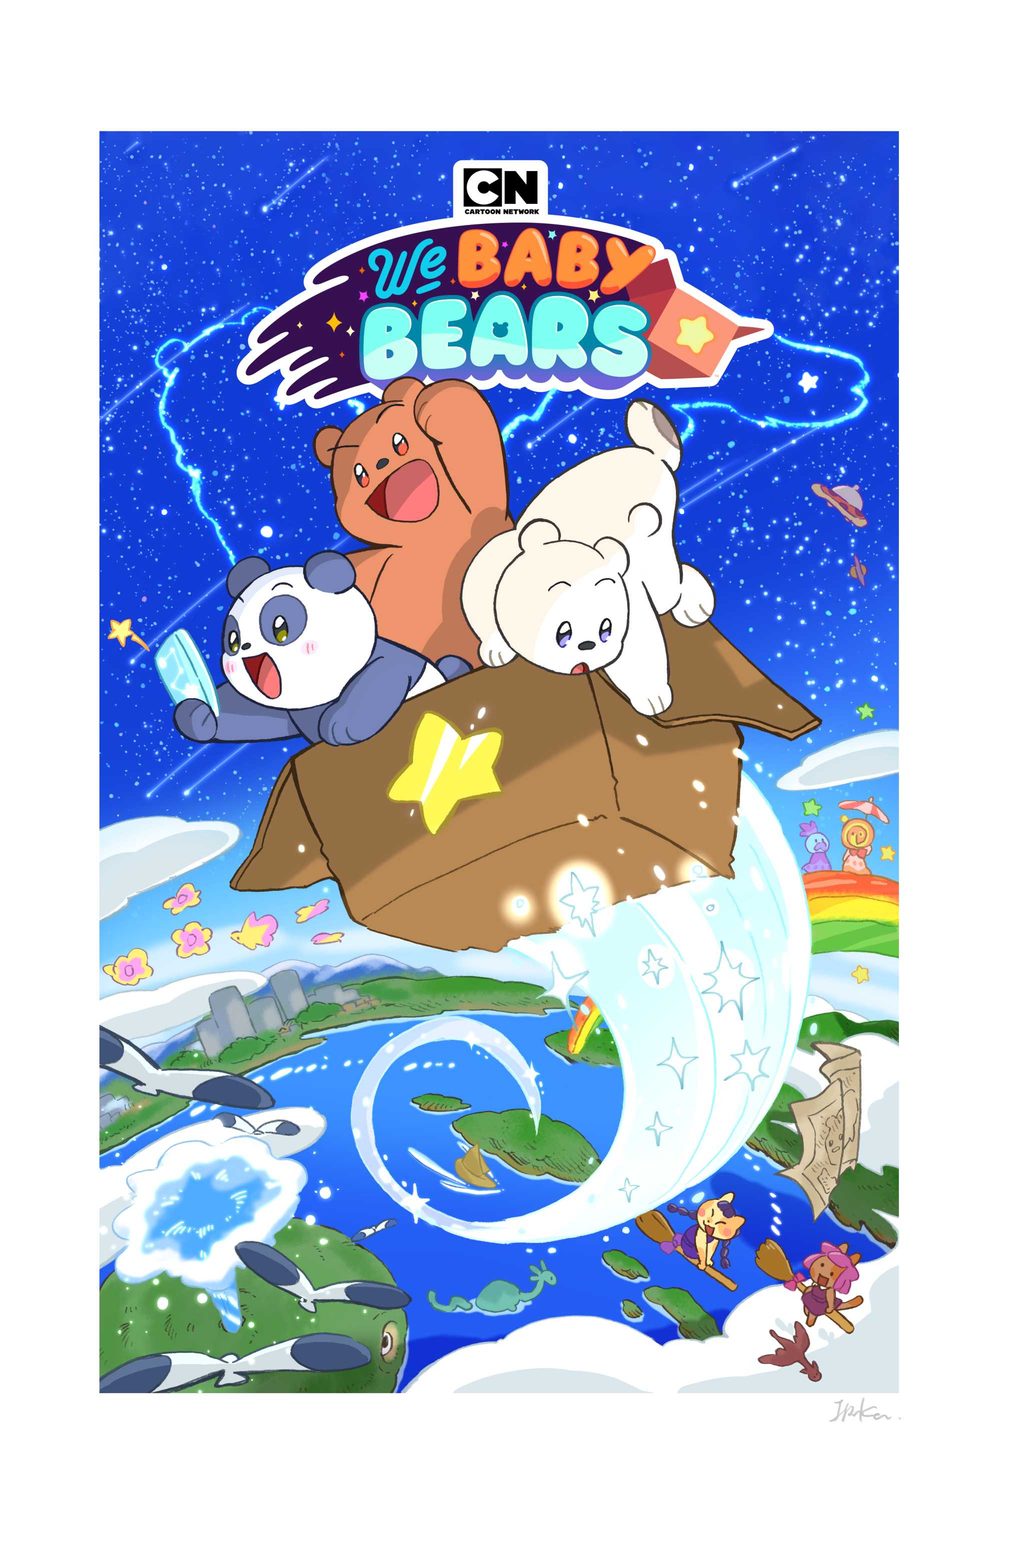 cartoon-network-announces-we-bare-bears-spinoff